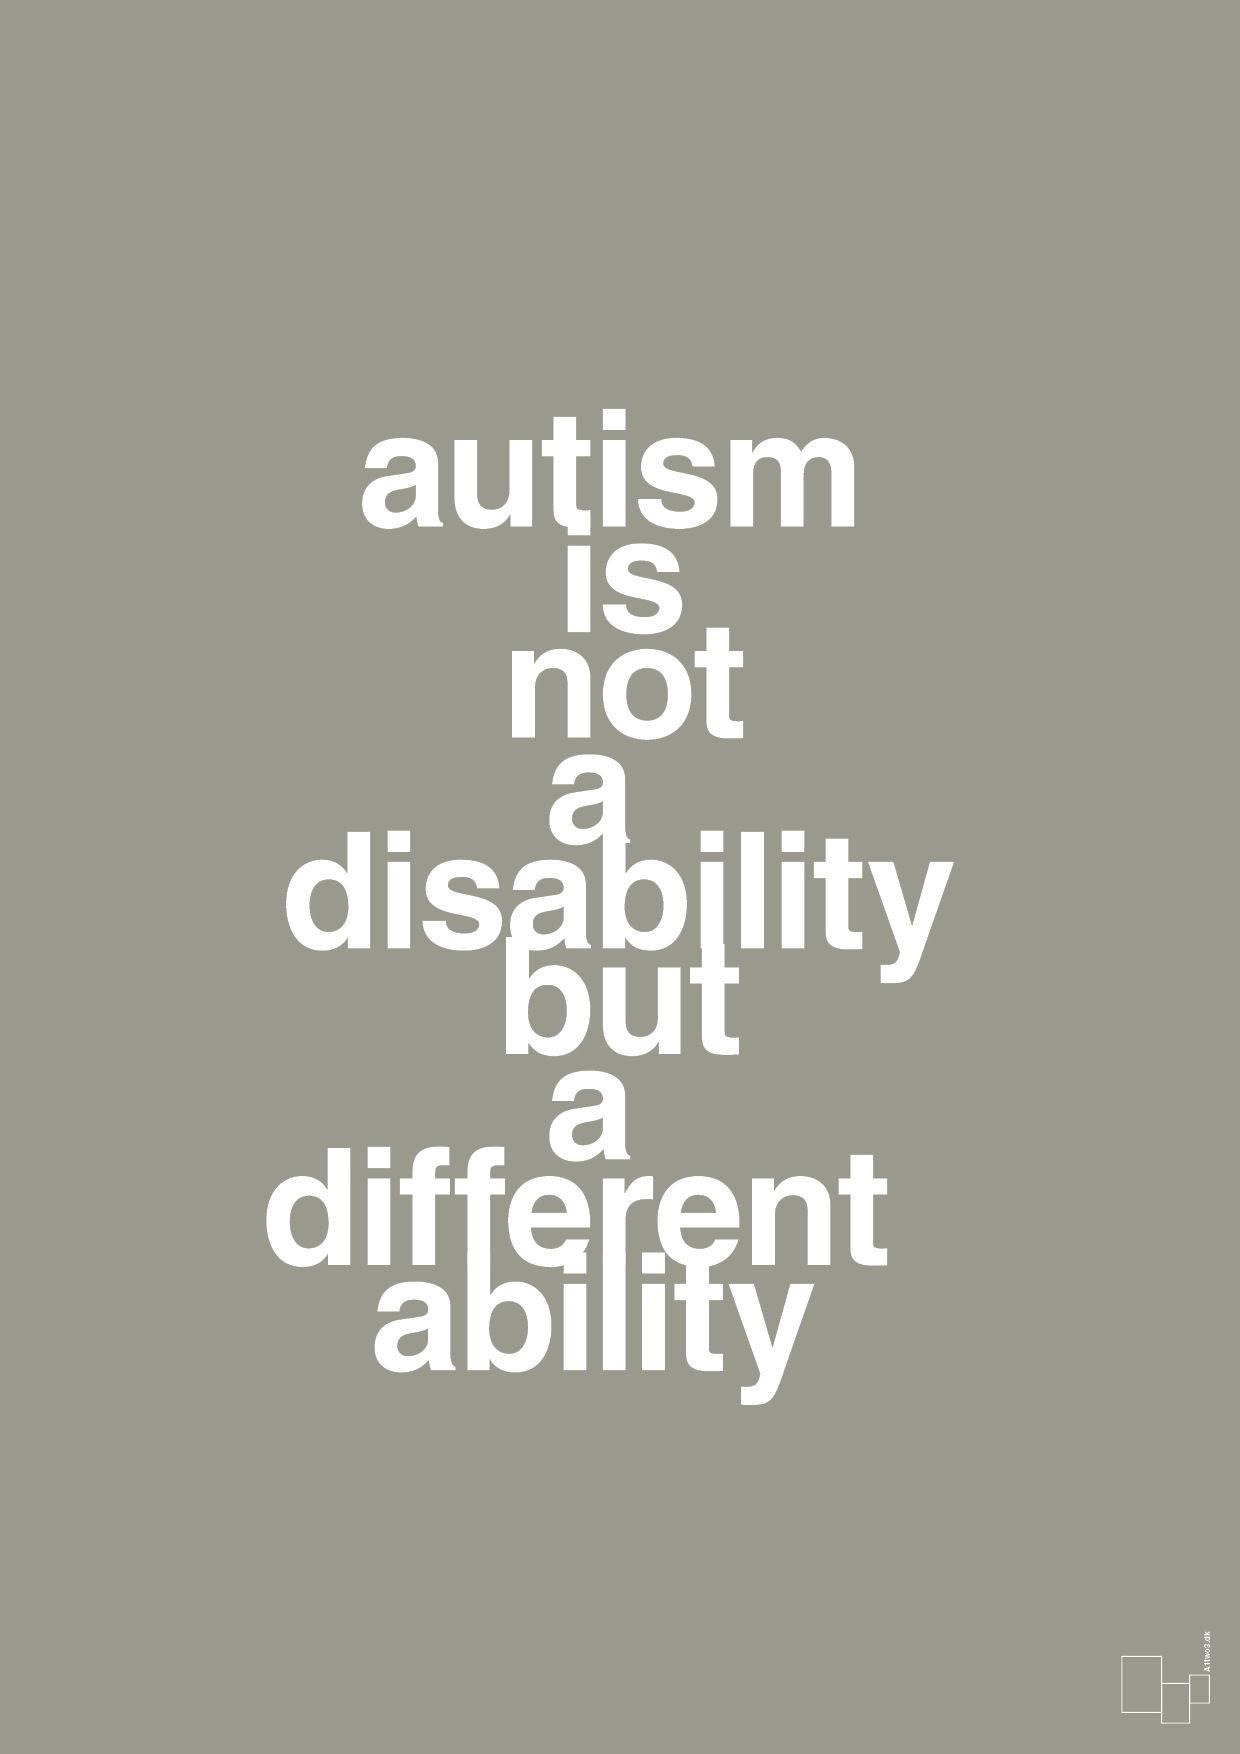 autism is not a disability but a different ability - Plakat med Samfund i Battleship Gray